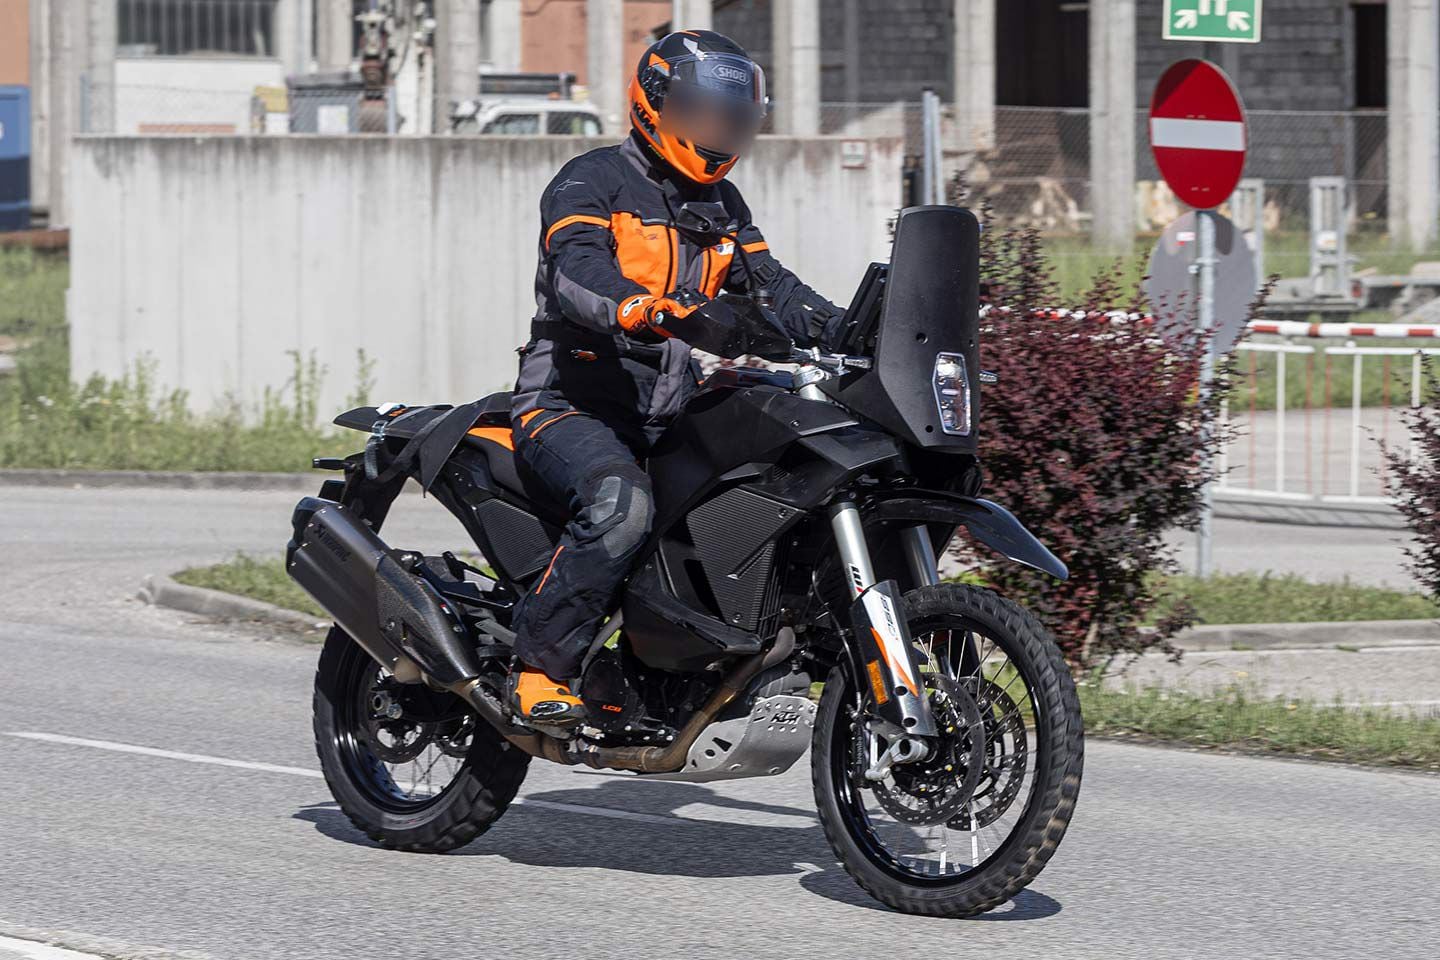 This is what is believed to be the 2025 KTM 1390 Rally that was recently spied out testing.